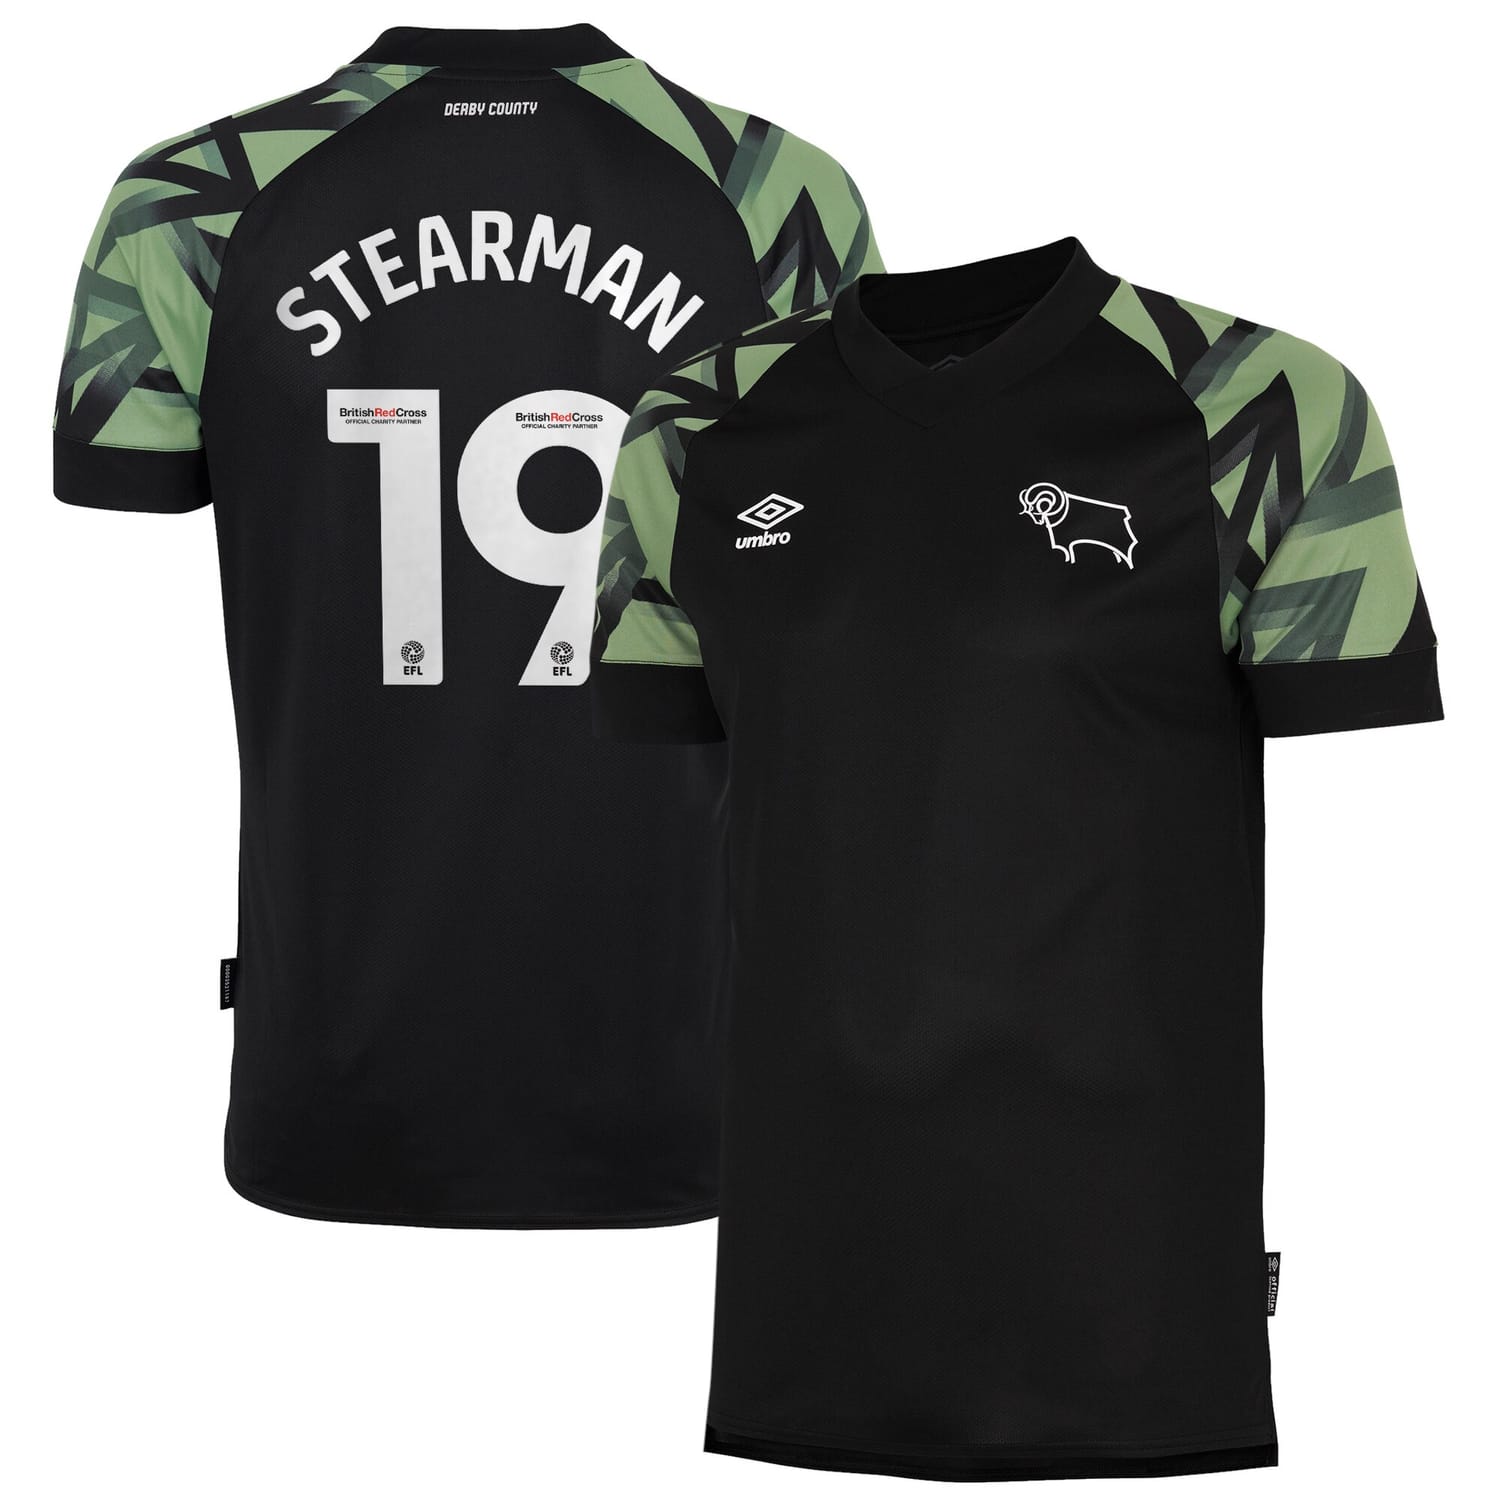 EFL League One Derby County Away Jersey Shirt 2022-23 player Stearman 19 printing for Men